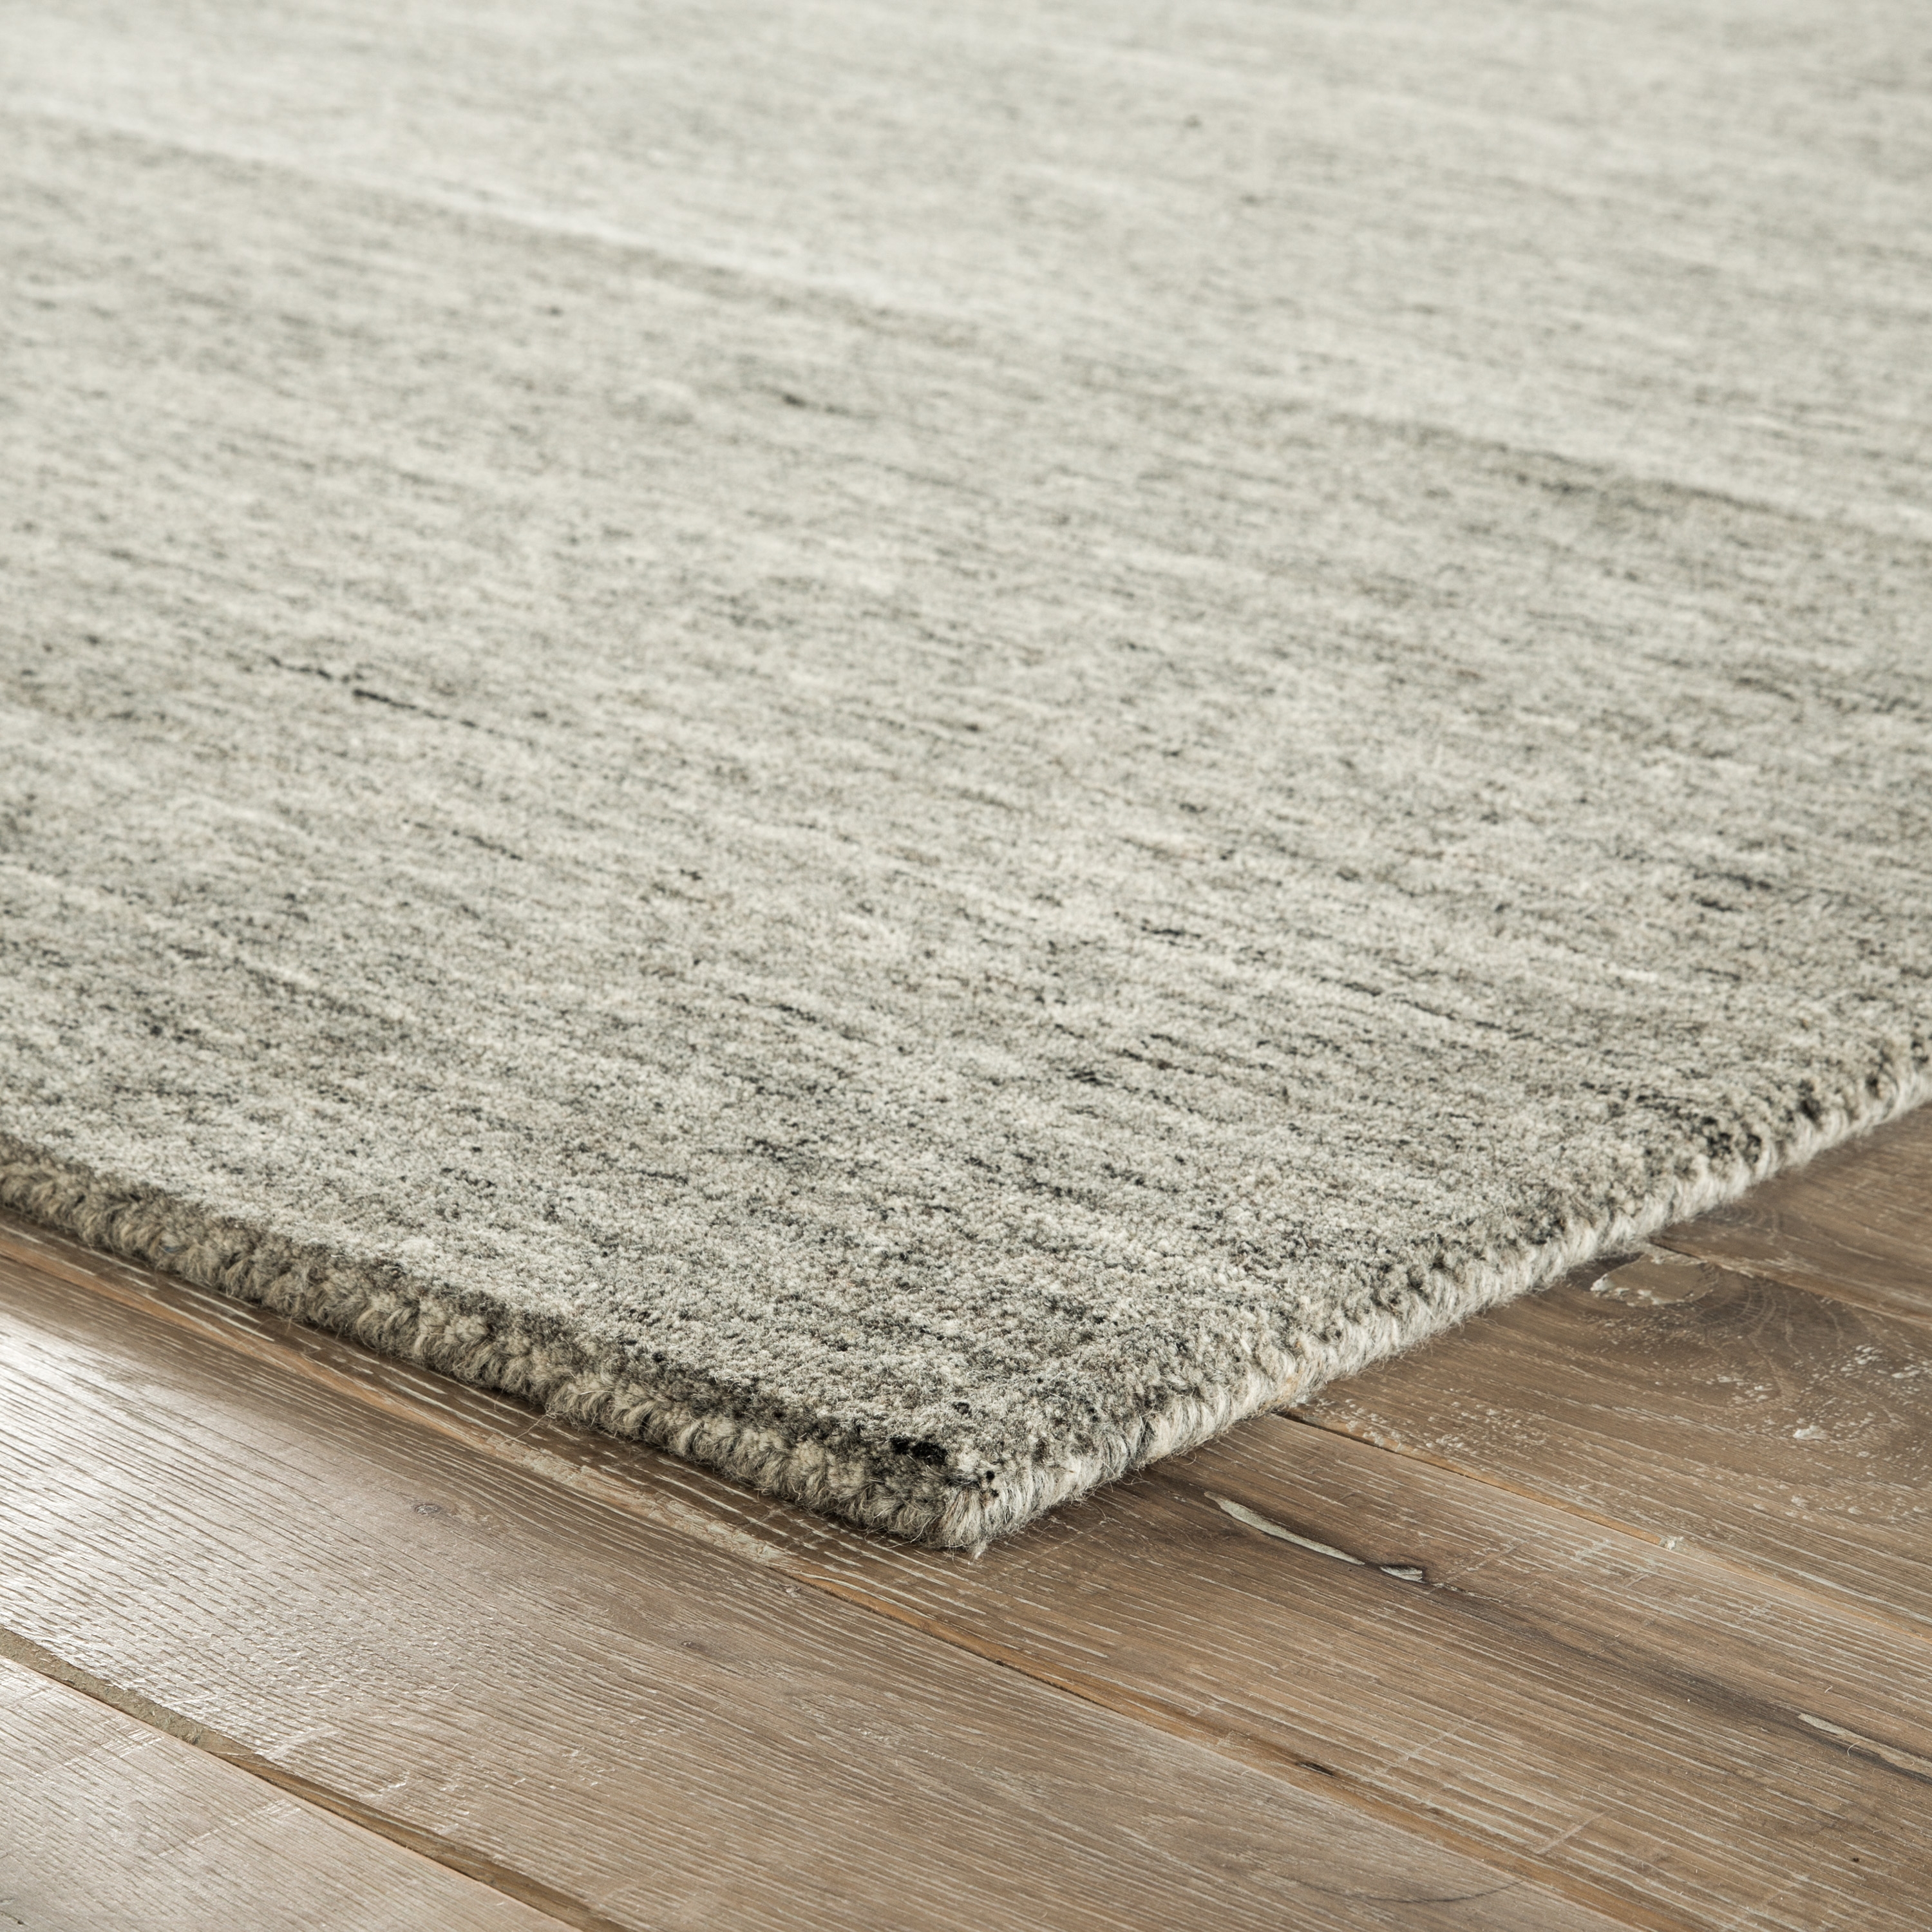 Elements Handmade Solid Gray/ Taupe Runner Rug (2'6" X 8') - Image 1